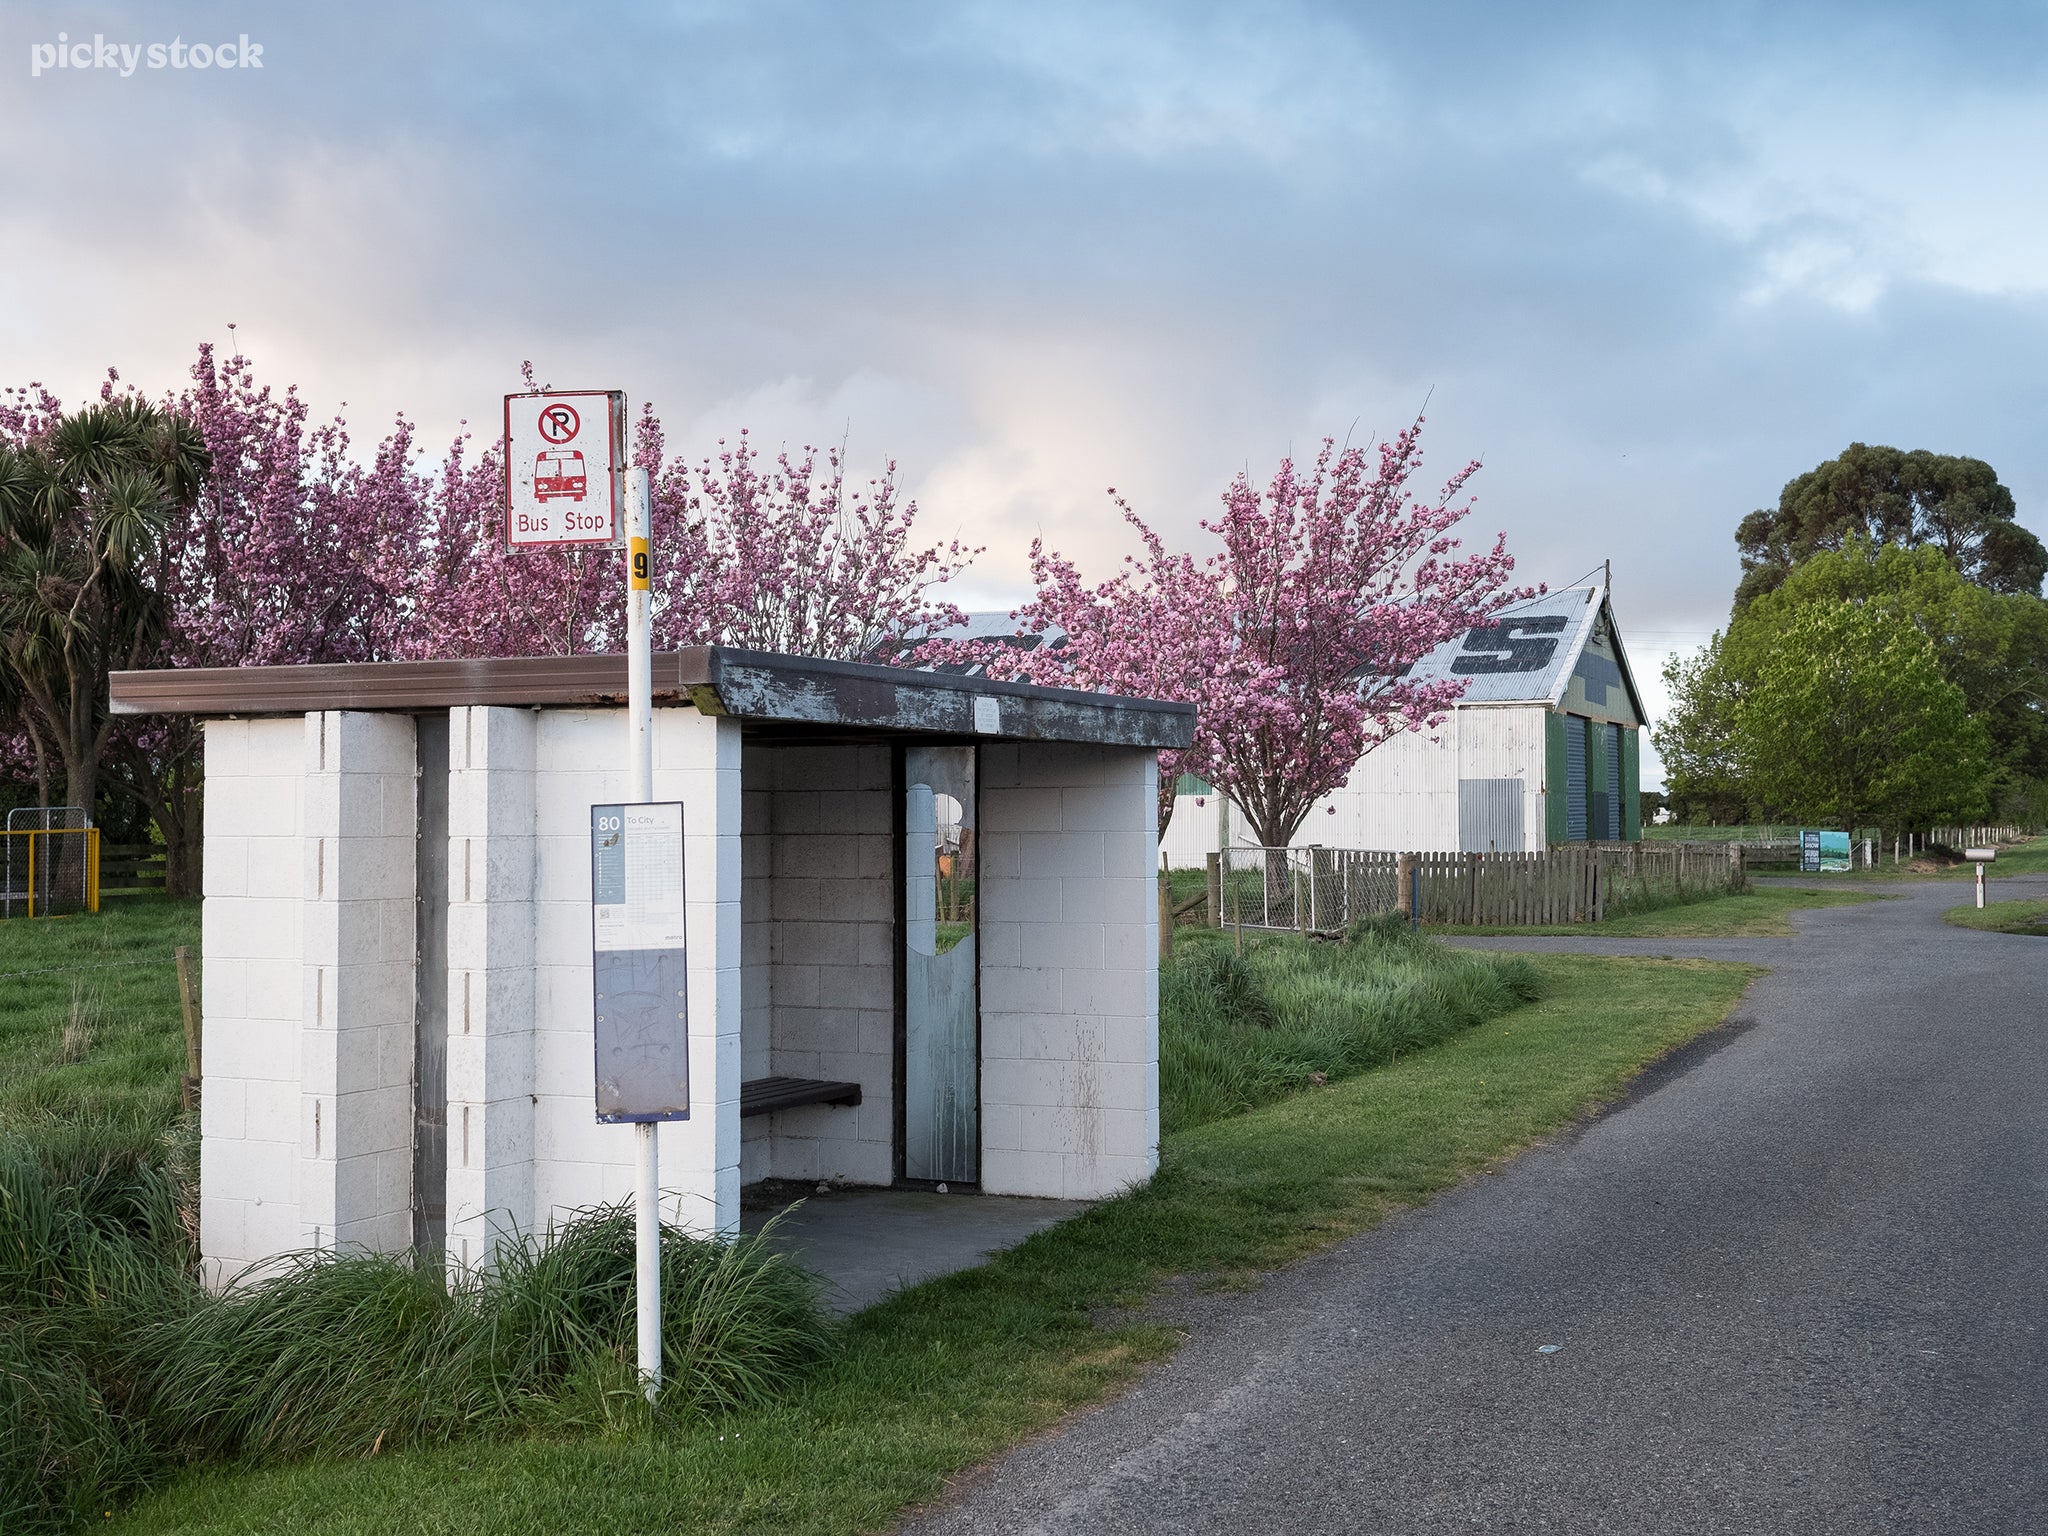 A landscape of a rural bus stop made of white painted brick and glass covered in grime. Tall wild grass grows around the shelter will a group of pink cheery blossoms bloom in the background next to a farming shed.